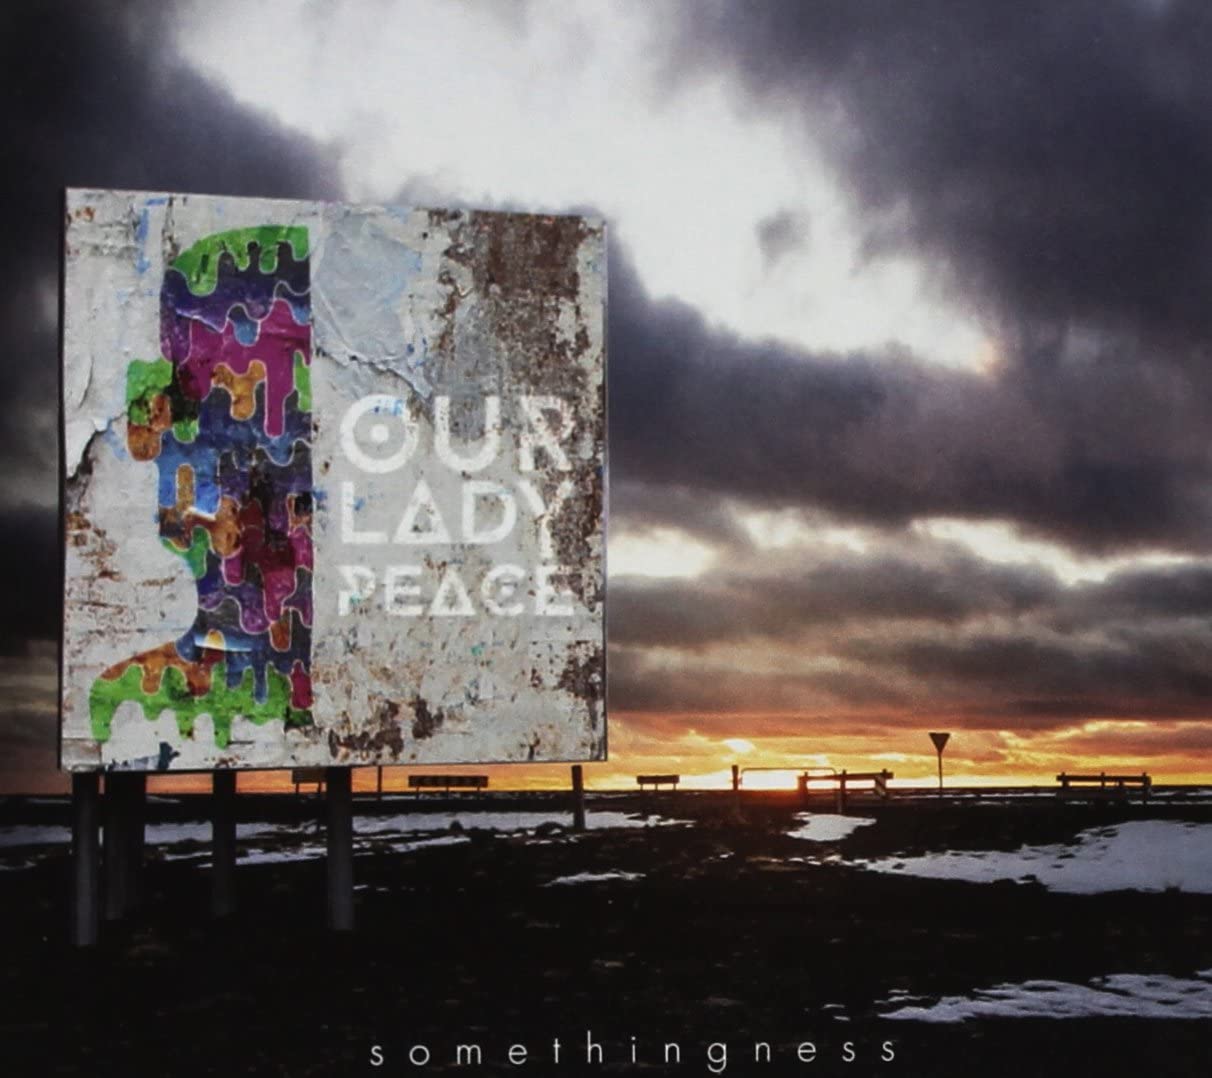 Our Lady Peace - Somethingness - CD